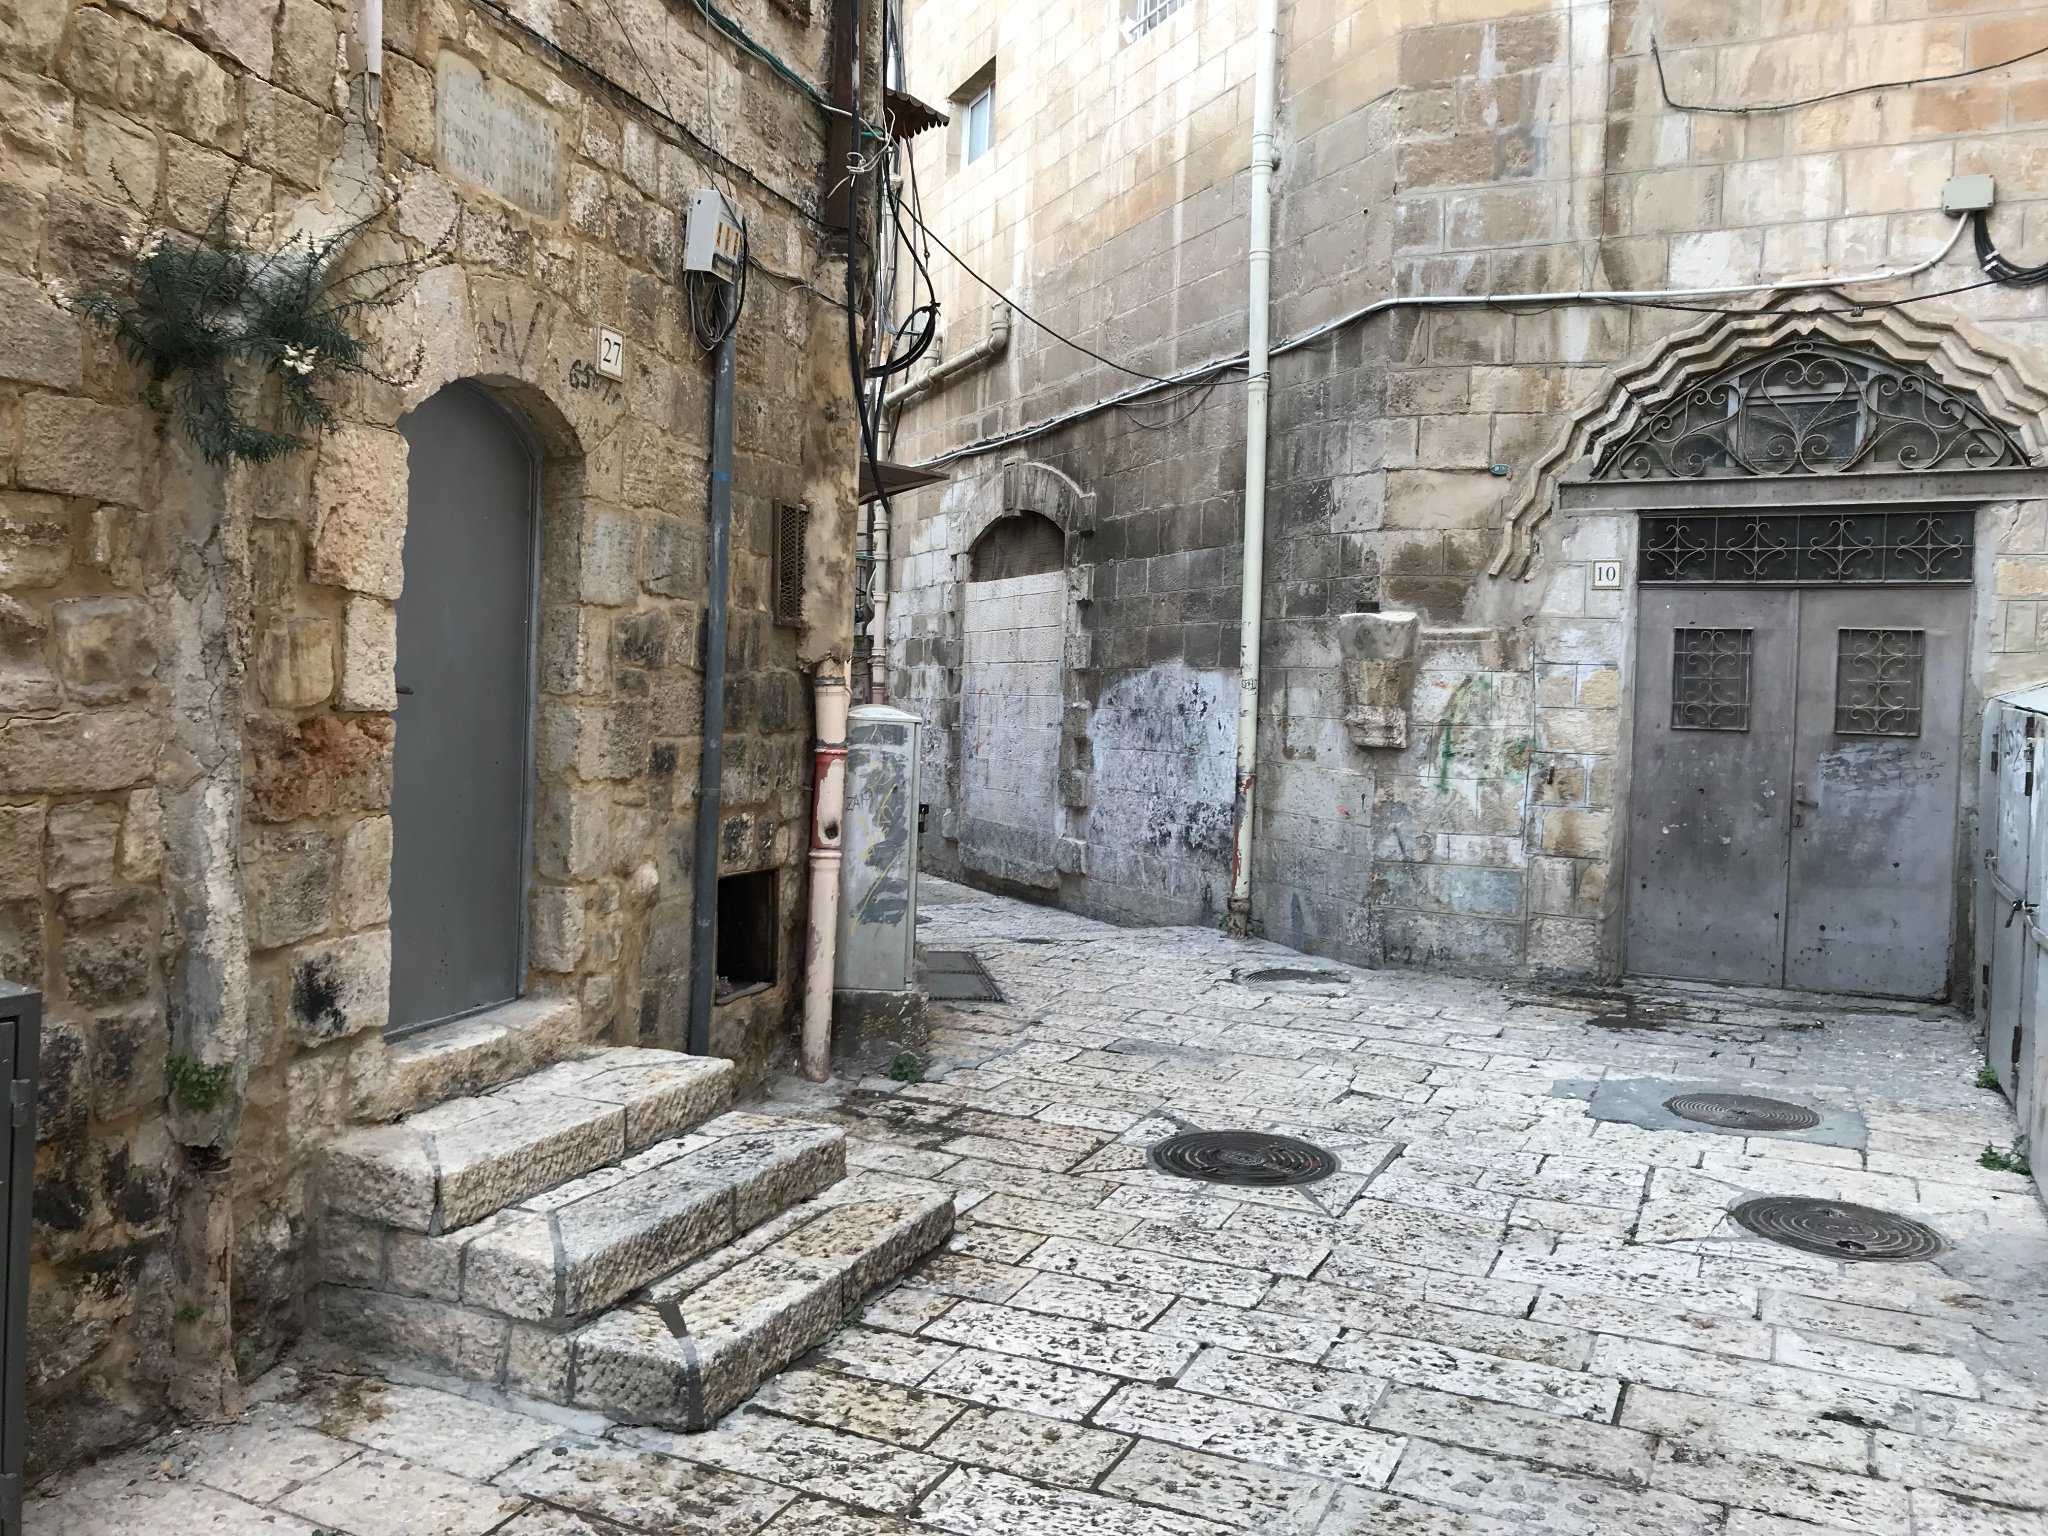 Photo of house and street in Jerusalem by Ahmad Nabil